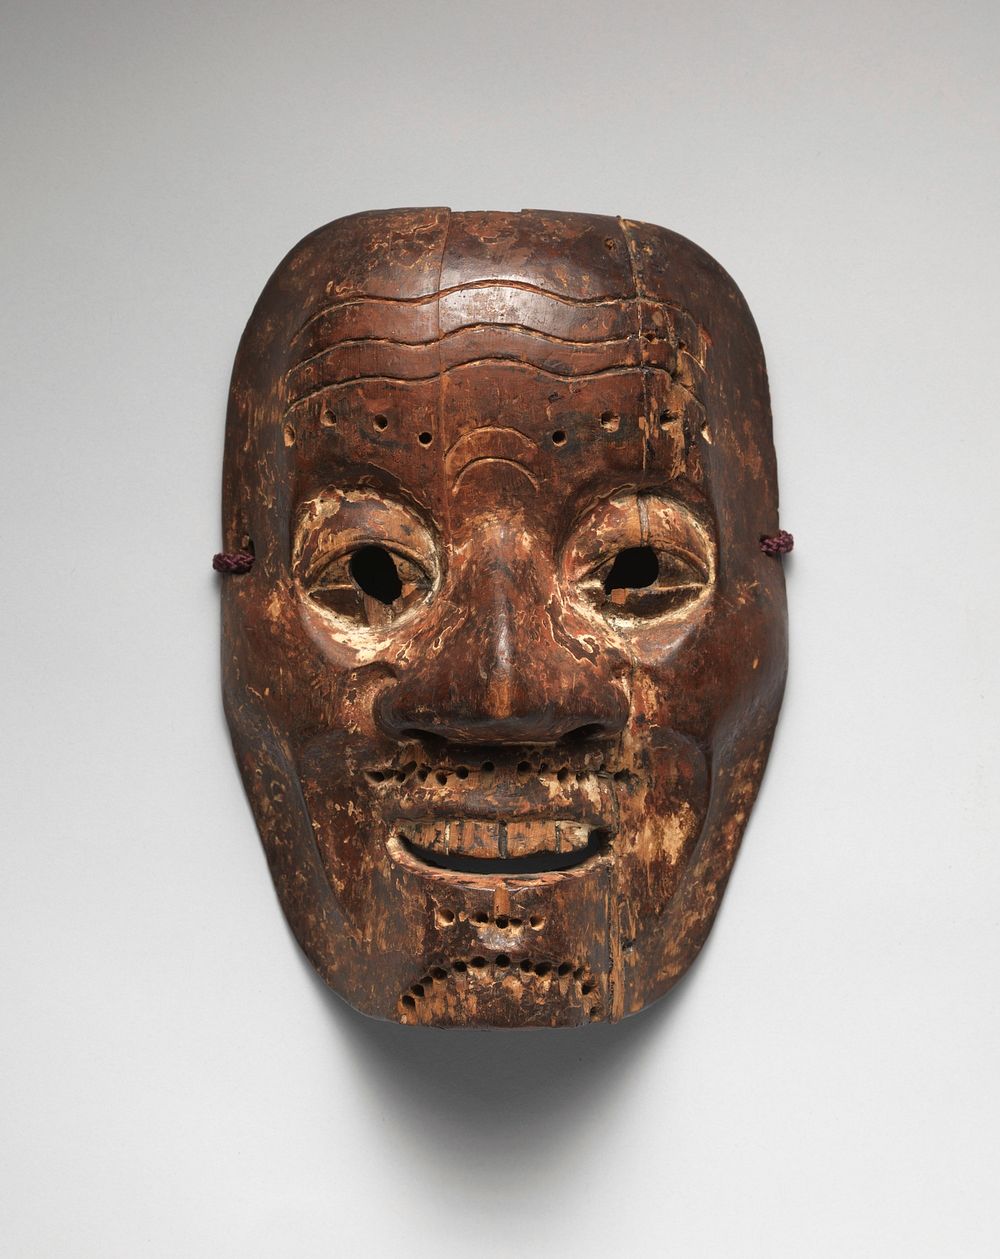 Mask of male face with large nose, round eyes with carved out eyeholes; narrow grin with top teeth visible; wrinkles in…